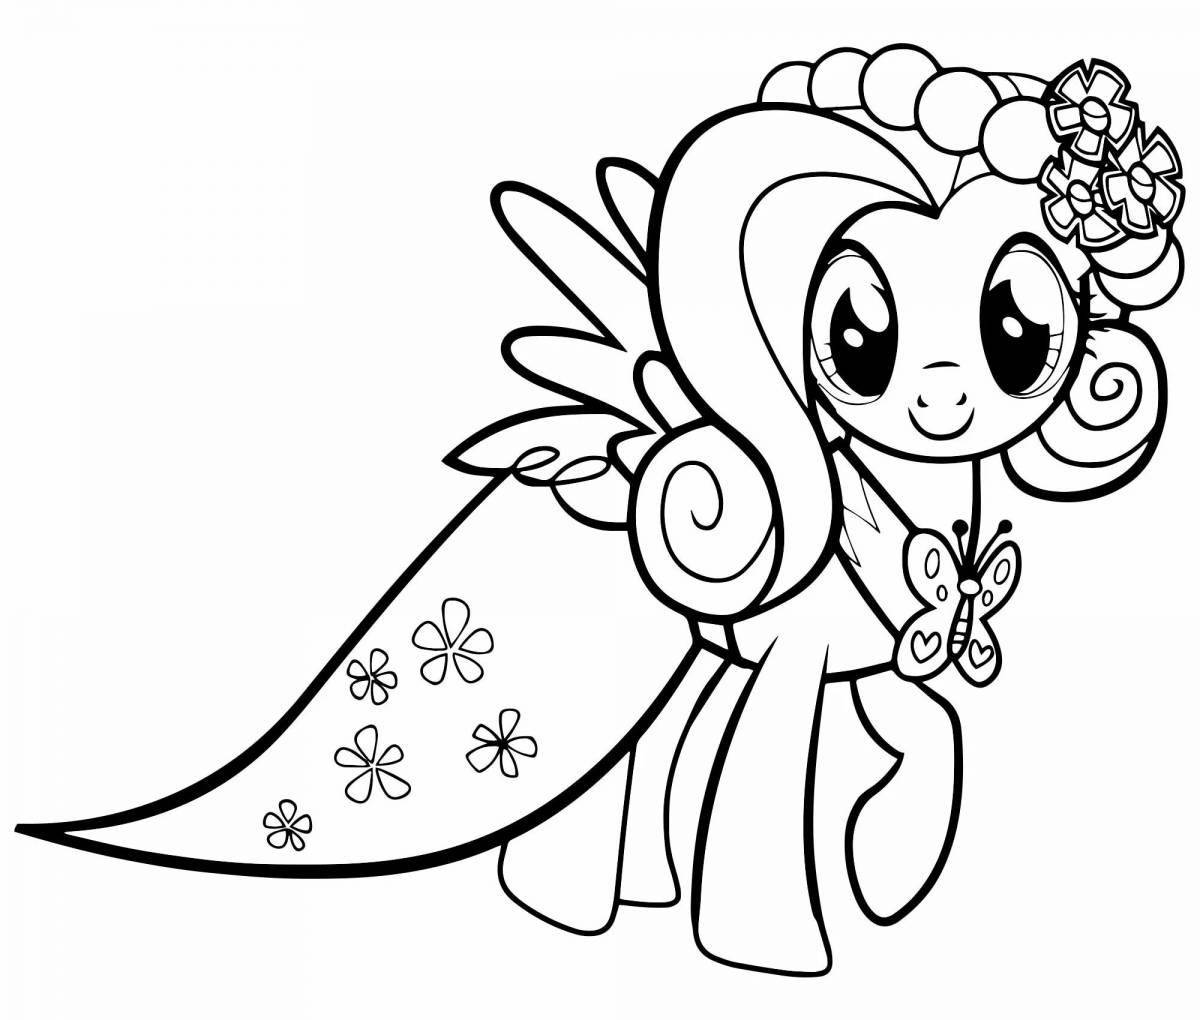 Glitter pony coloring page